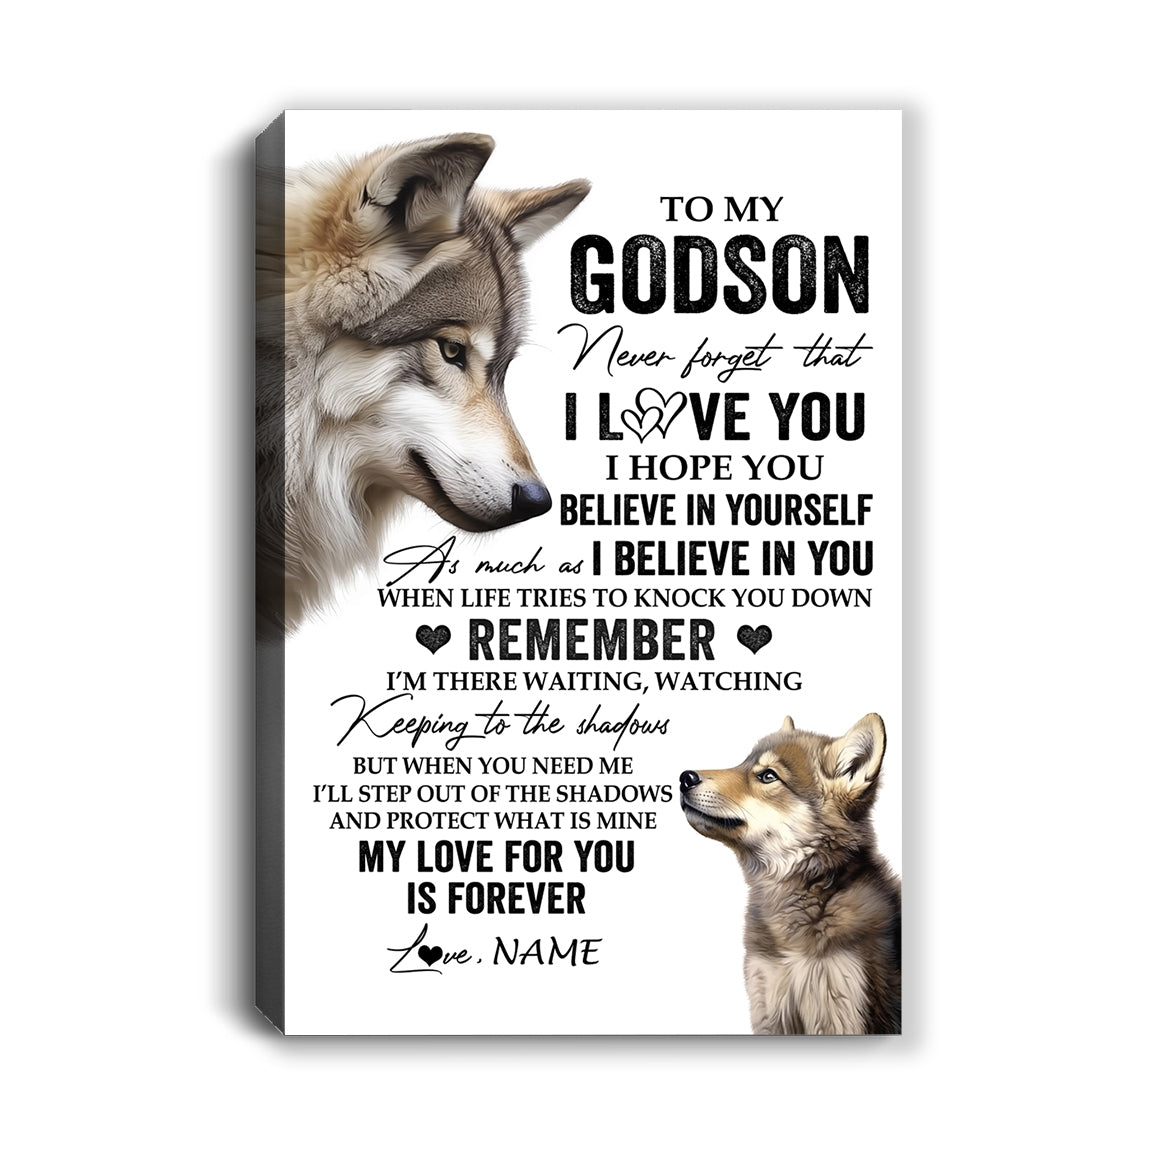 Personalized_To_My_Godson_Canvas_From_Godfather_Godmother_Wolf_My_Love_For_You_Is_Forever_Godson_Birthday_Gifts_Graduation_Christmas_Custom_Wall_Art_Print_Framed_Canvas_Canvas_mockup-1.jpg